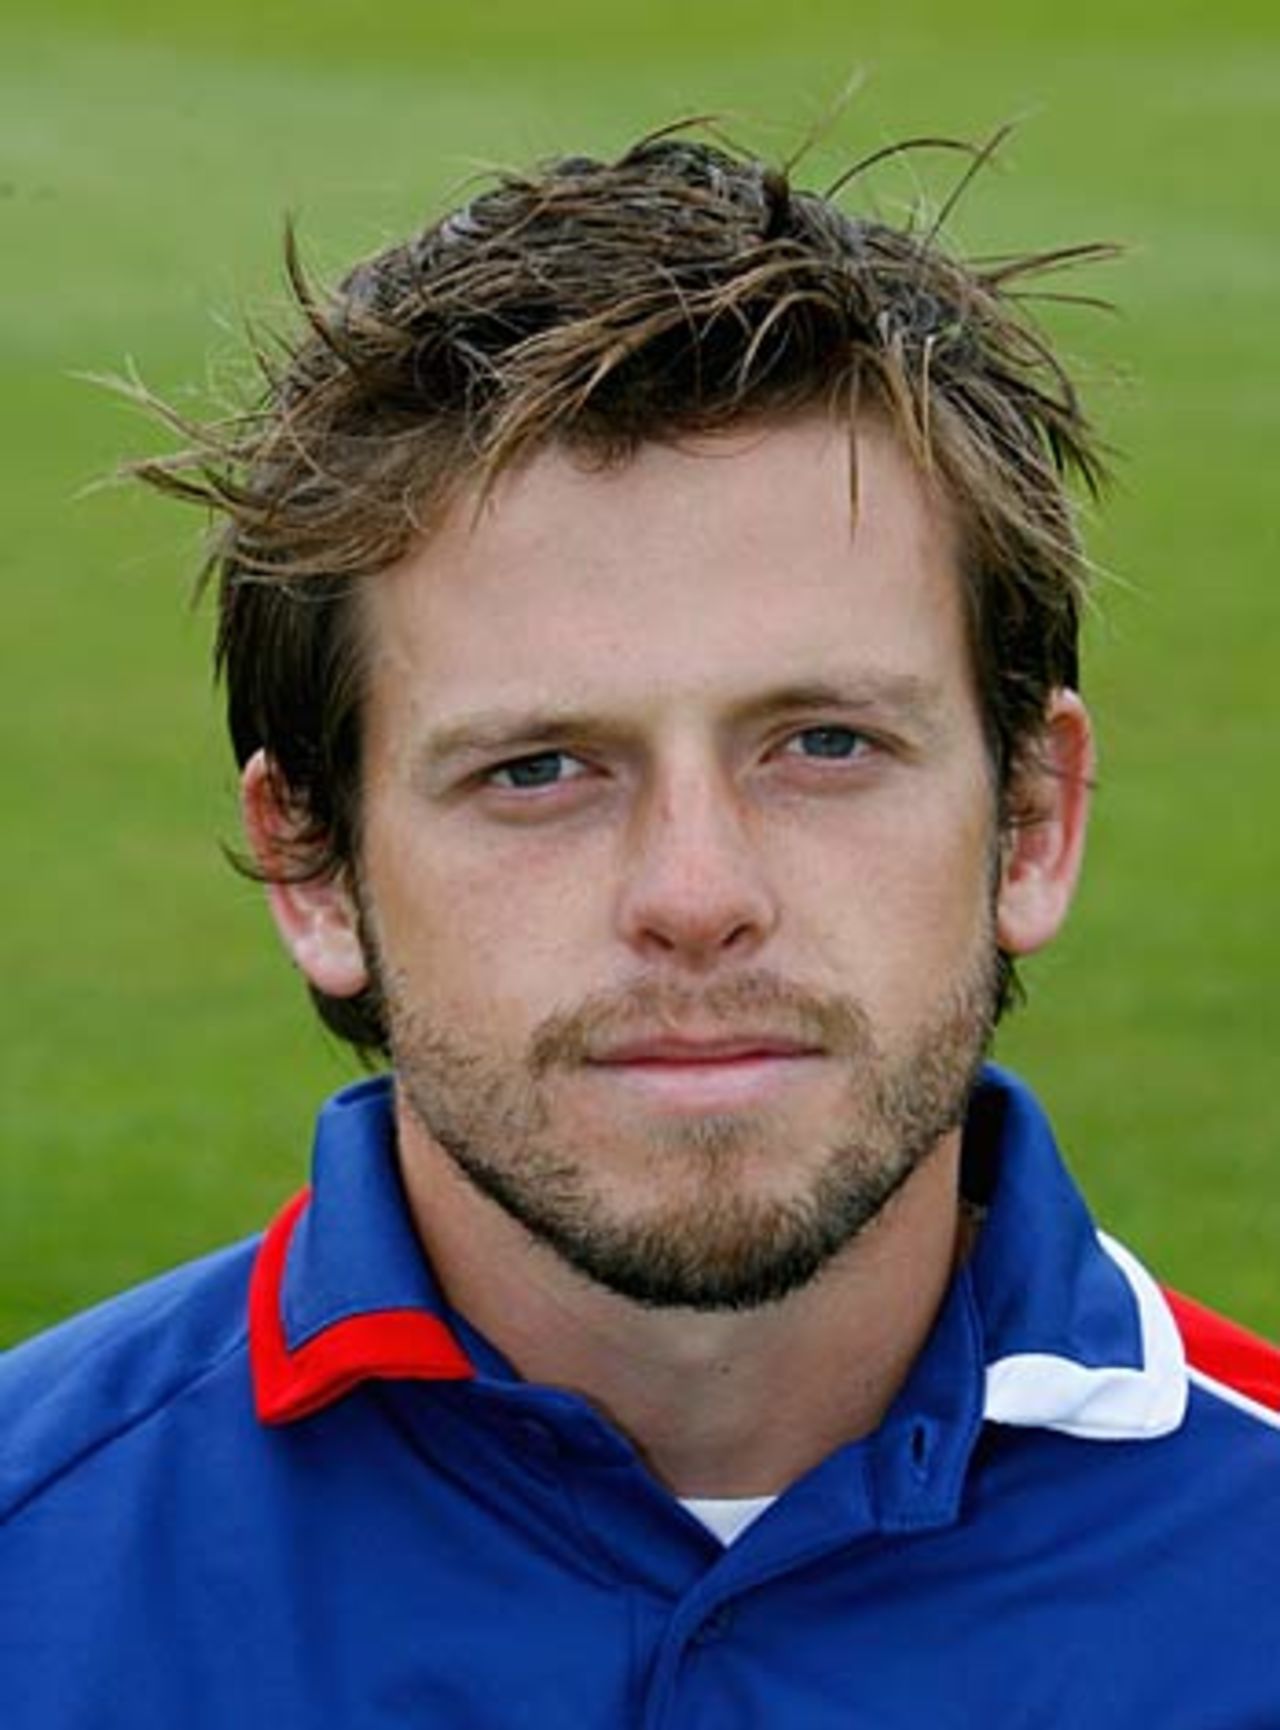 Ed Joyce on the day of his England debut, June 13, 2006